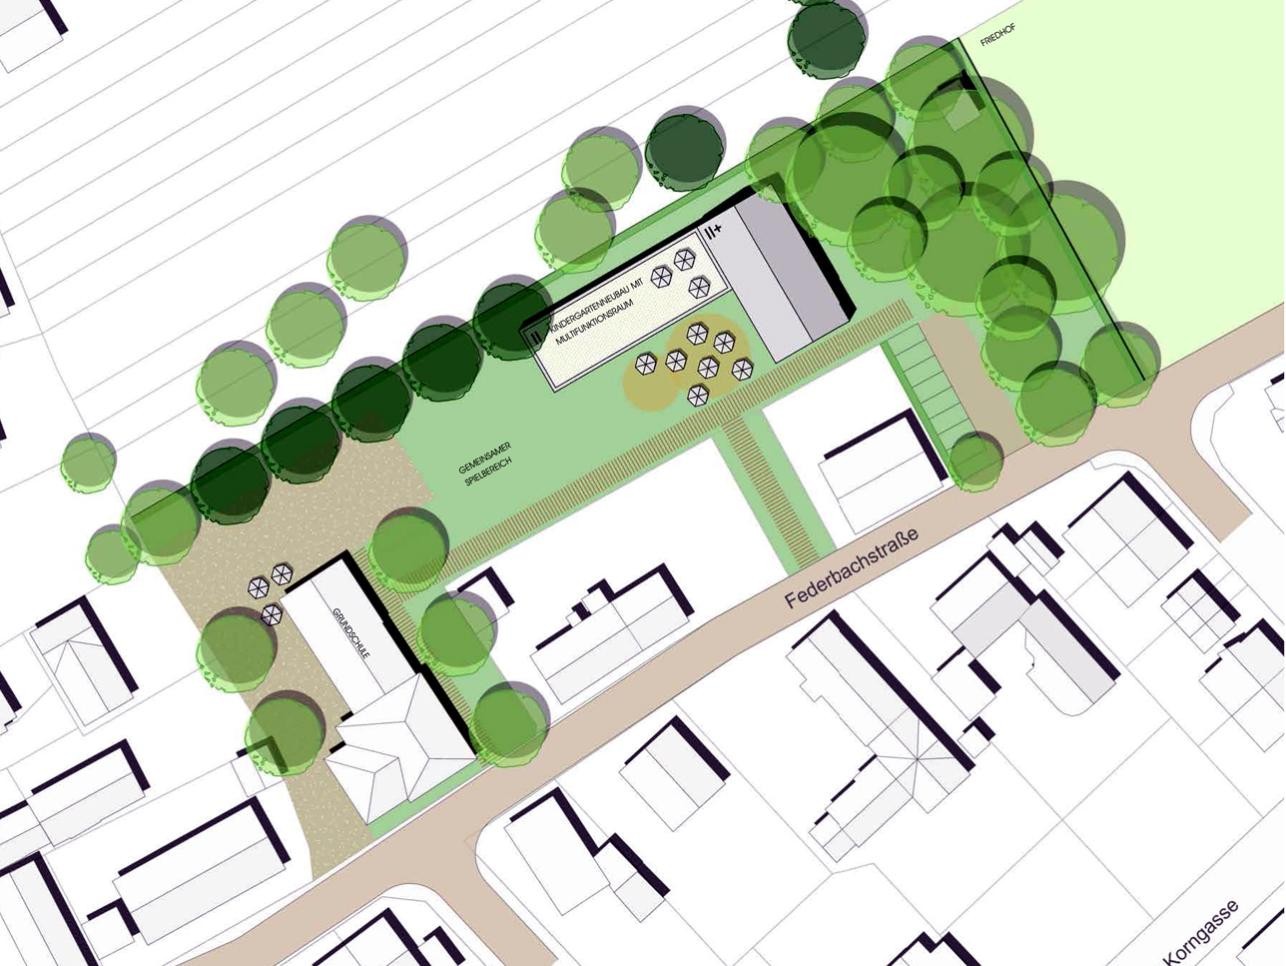 Plan new educational center Rauental with streets, houses and trees